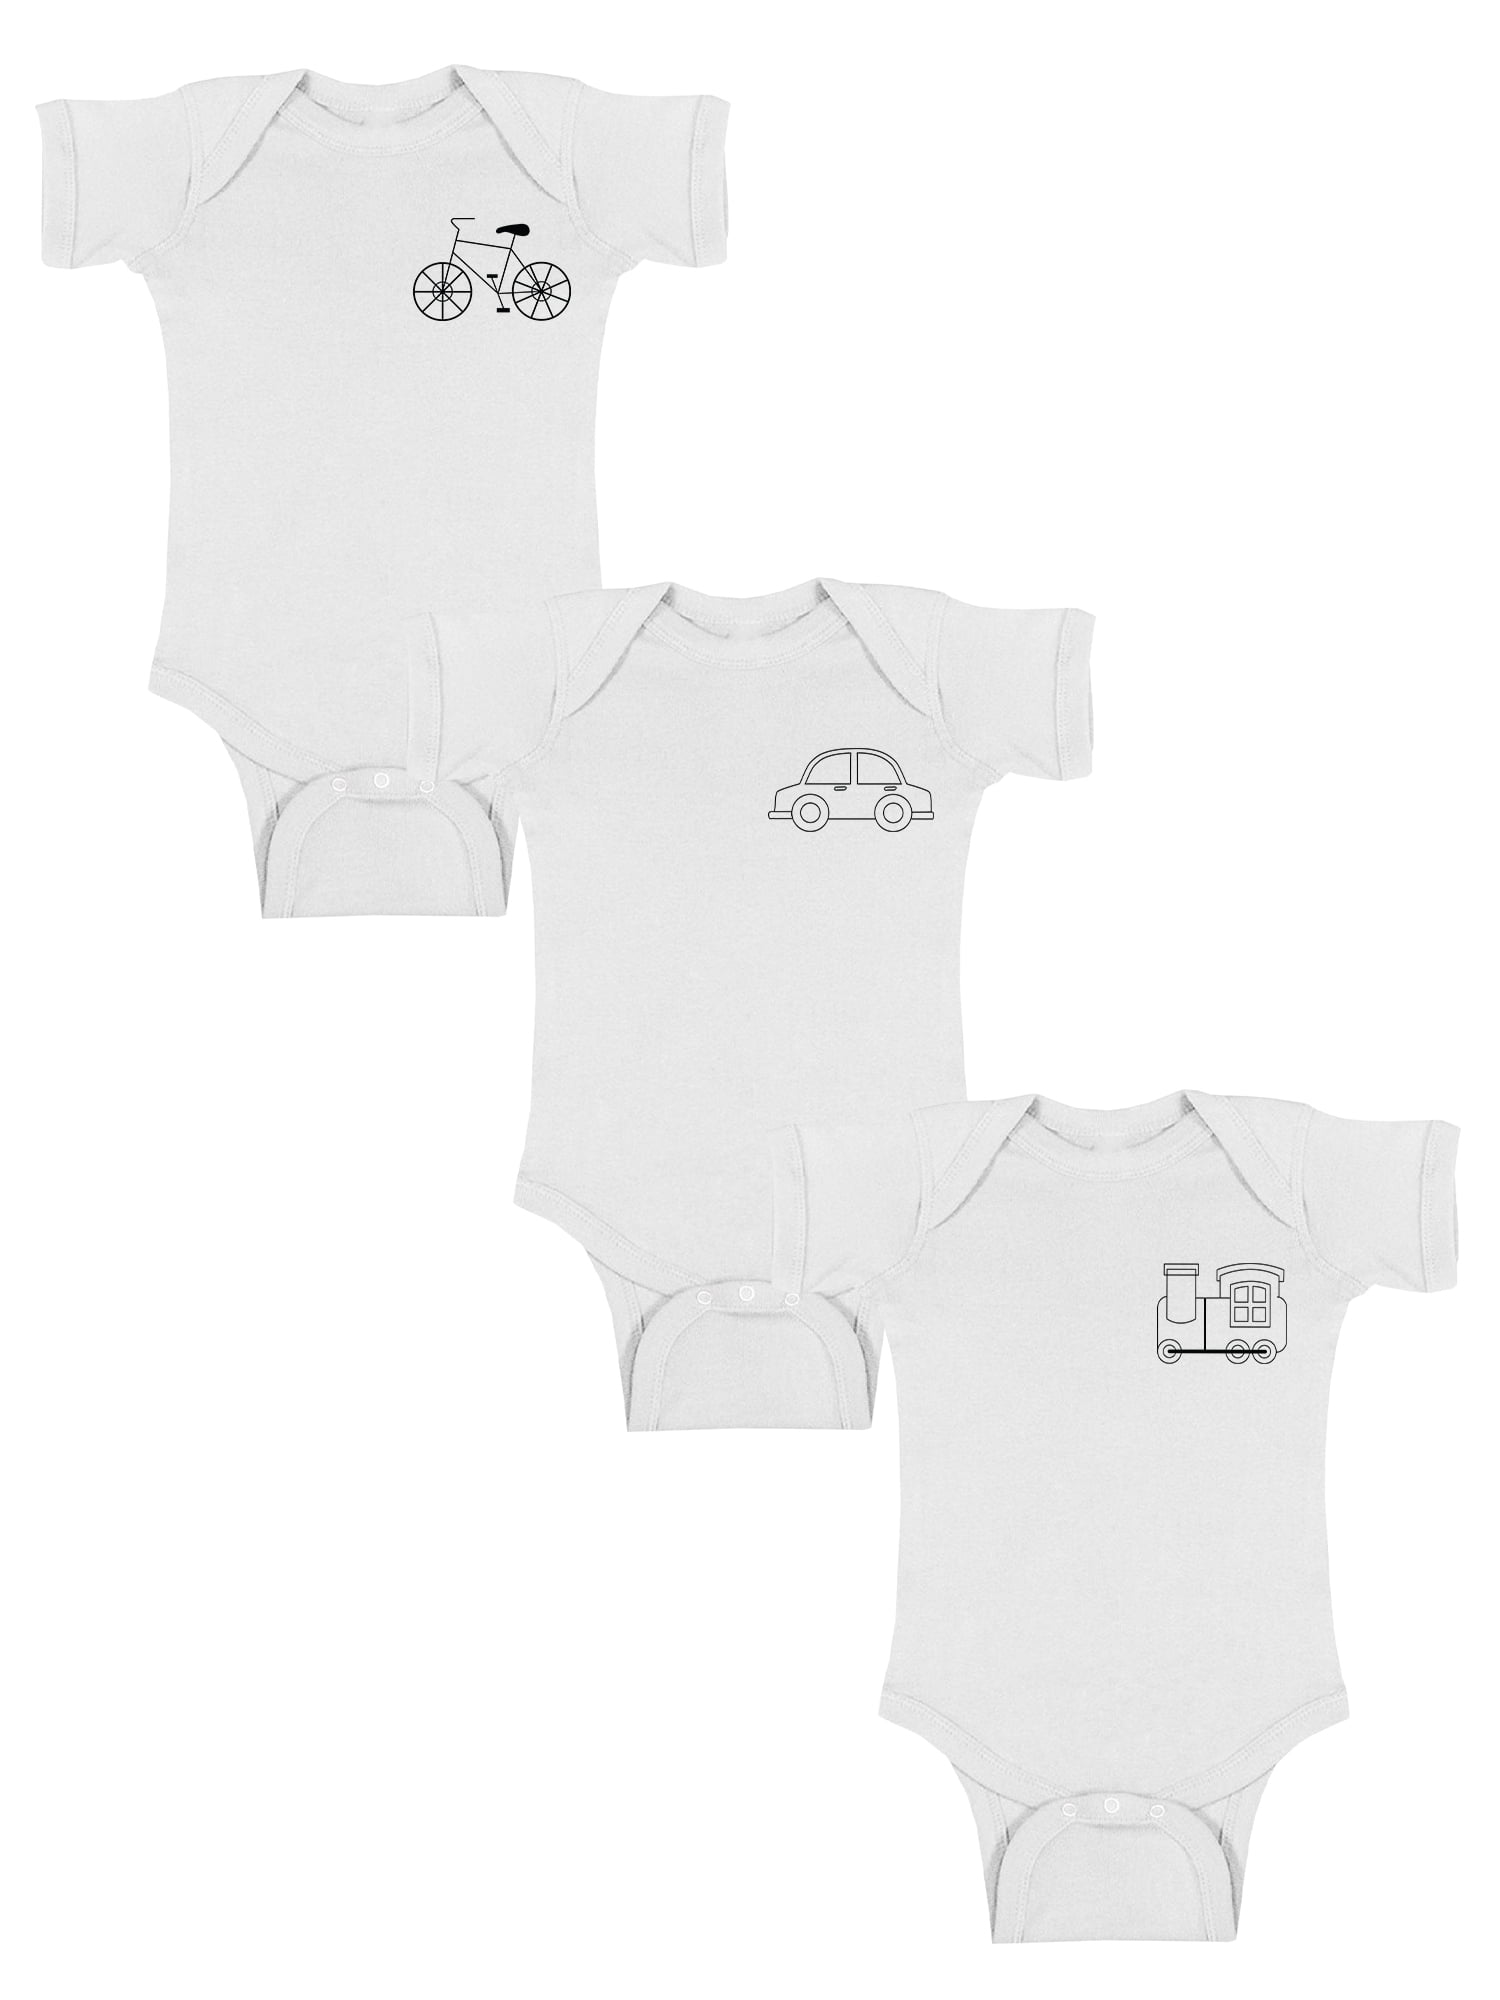 12 MONTHS OLD MILESTONE Baby Grow  Bodysuit Personalised Baby gift 1yr 